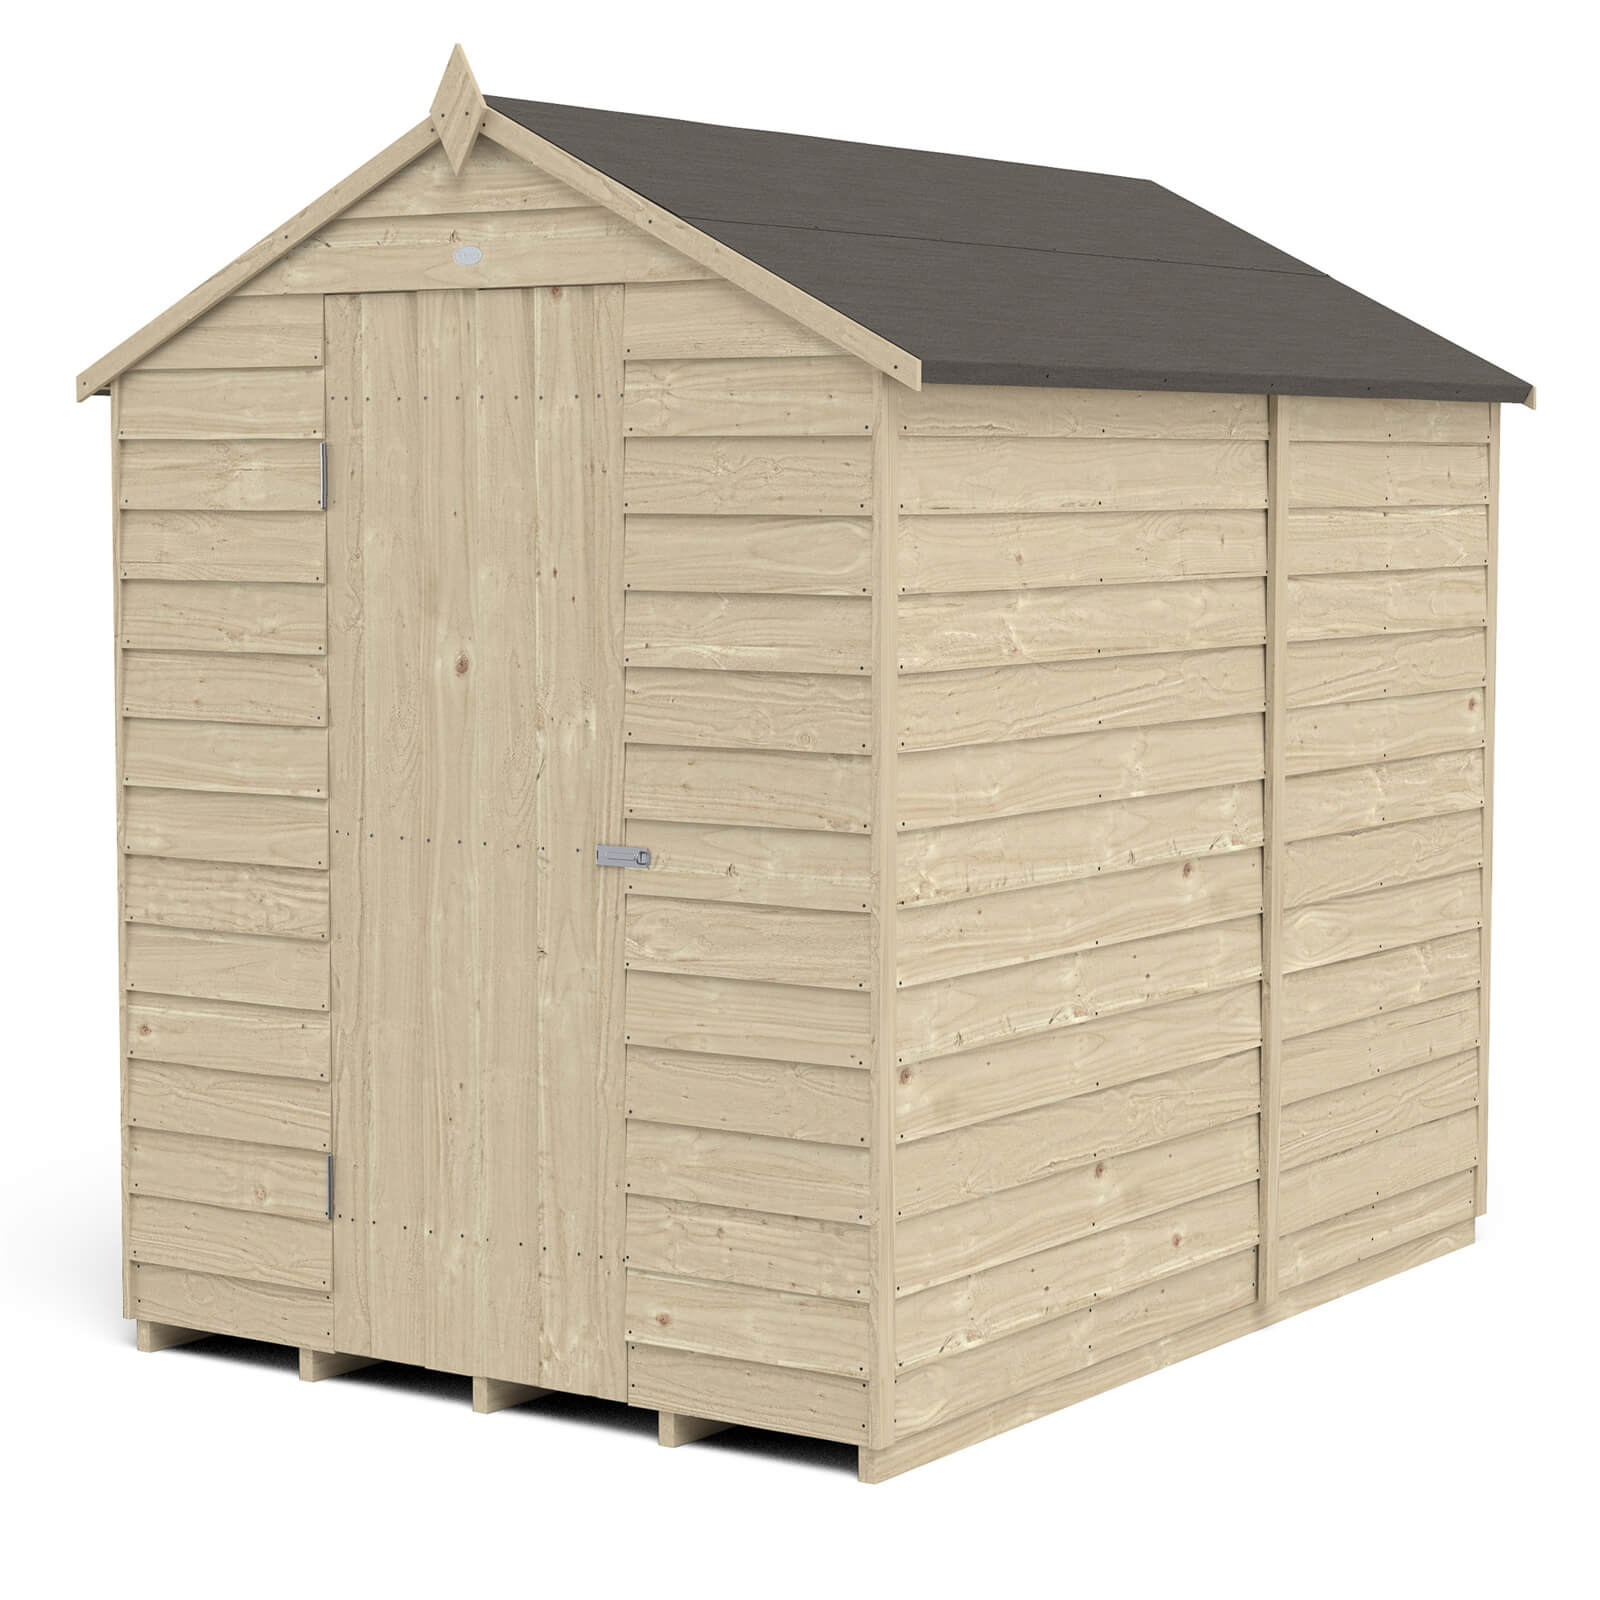 Forest 7 x 5ft Overlap Pressure Treated Apex Shed - No Window incl. Installation